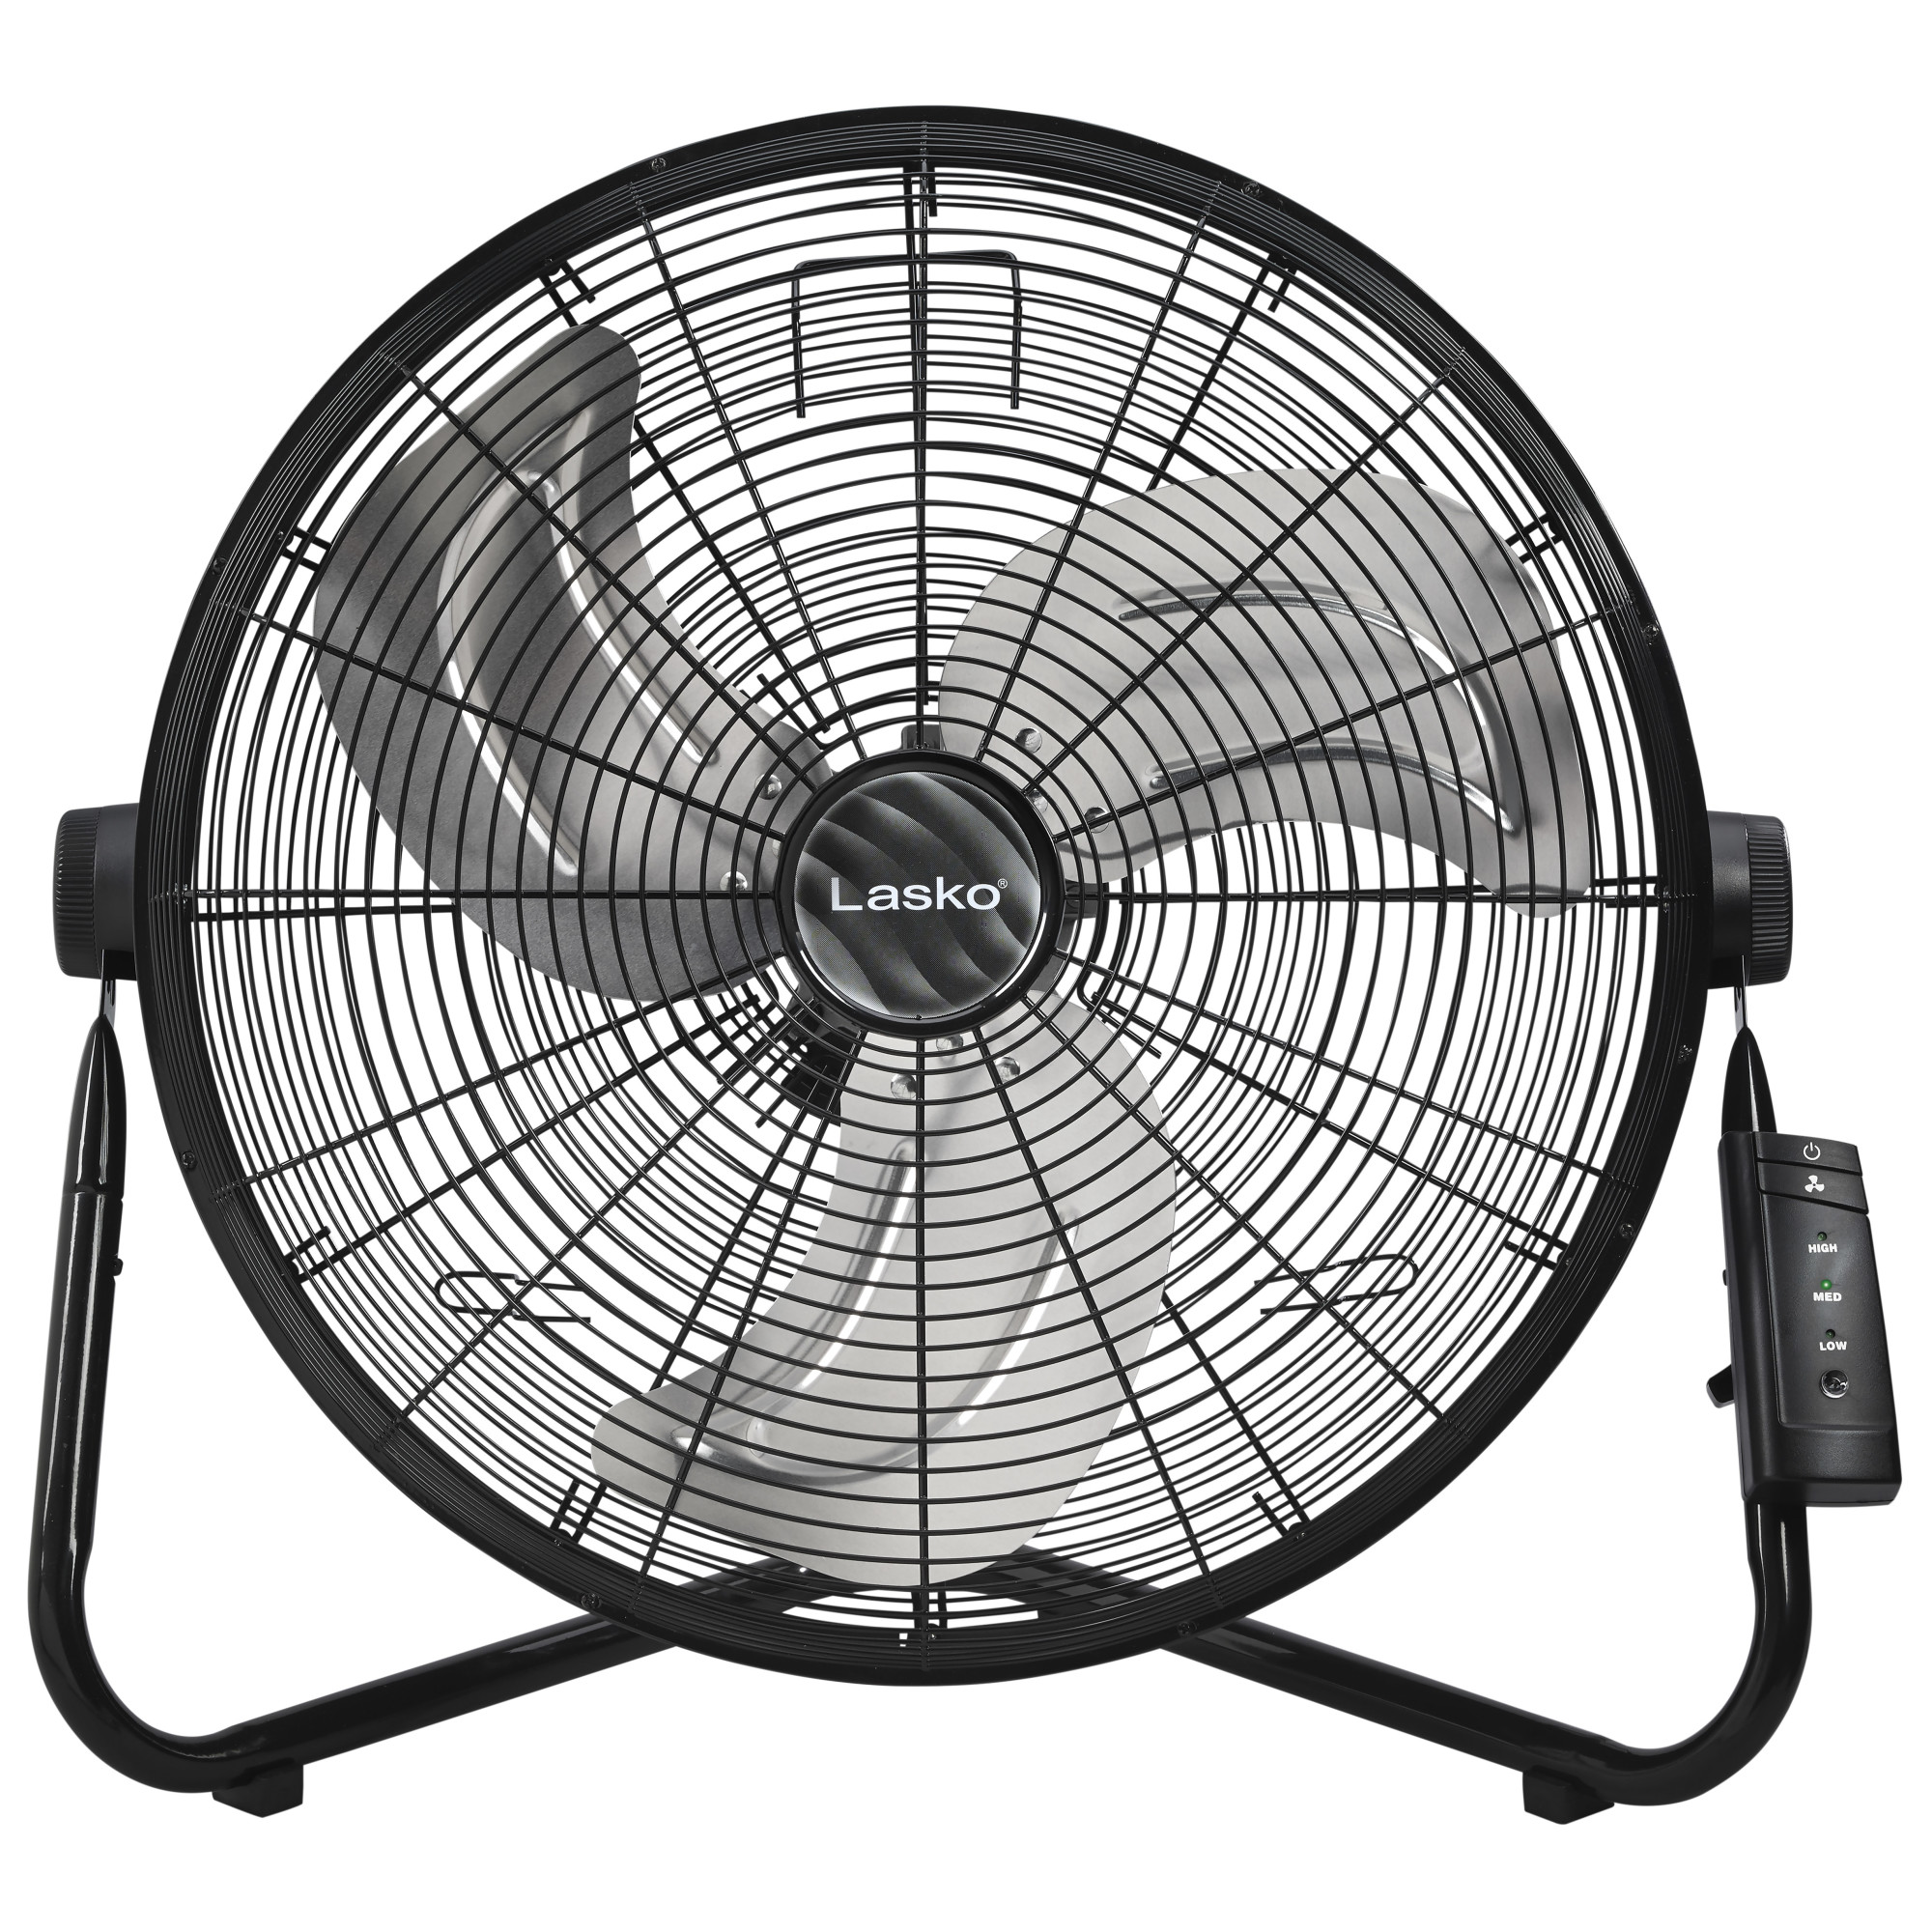 Lasko 20" High Velocity Floor Fan, Wall Mount Option and Remote, 22" H, Black, H20685, New - image 2 of 6